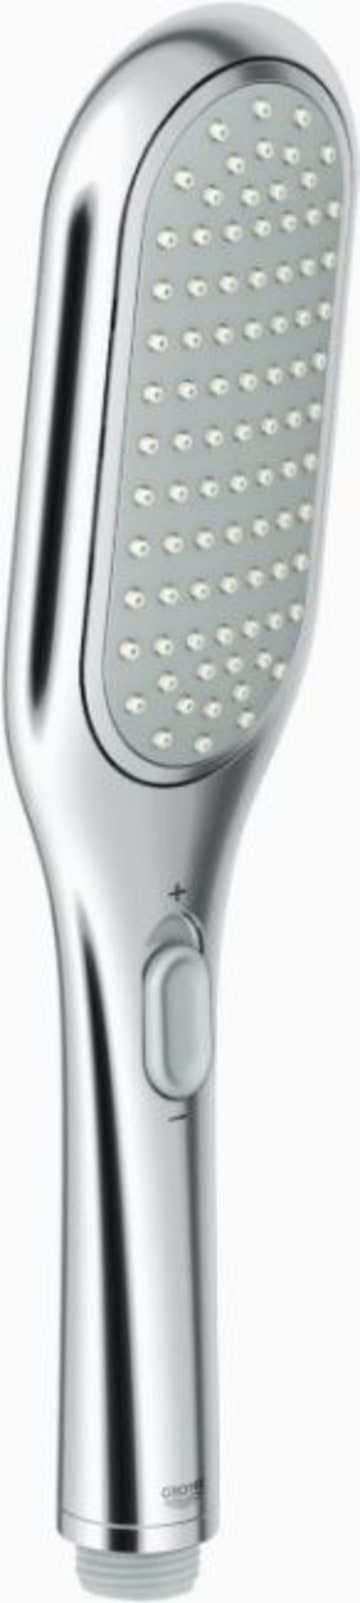 best shower heads grohe eco